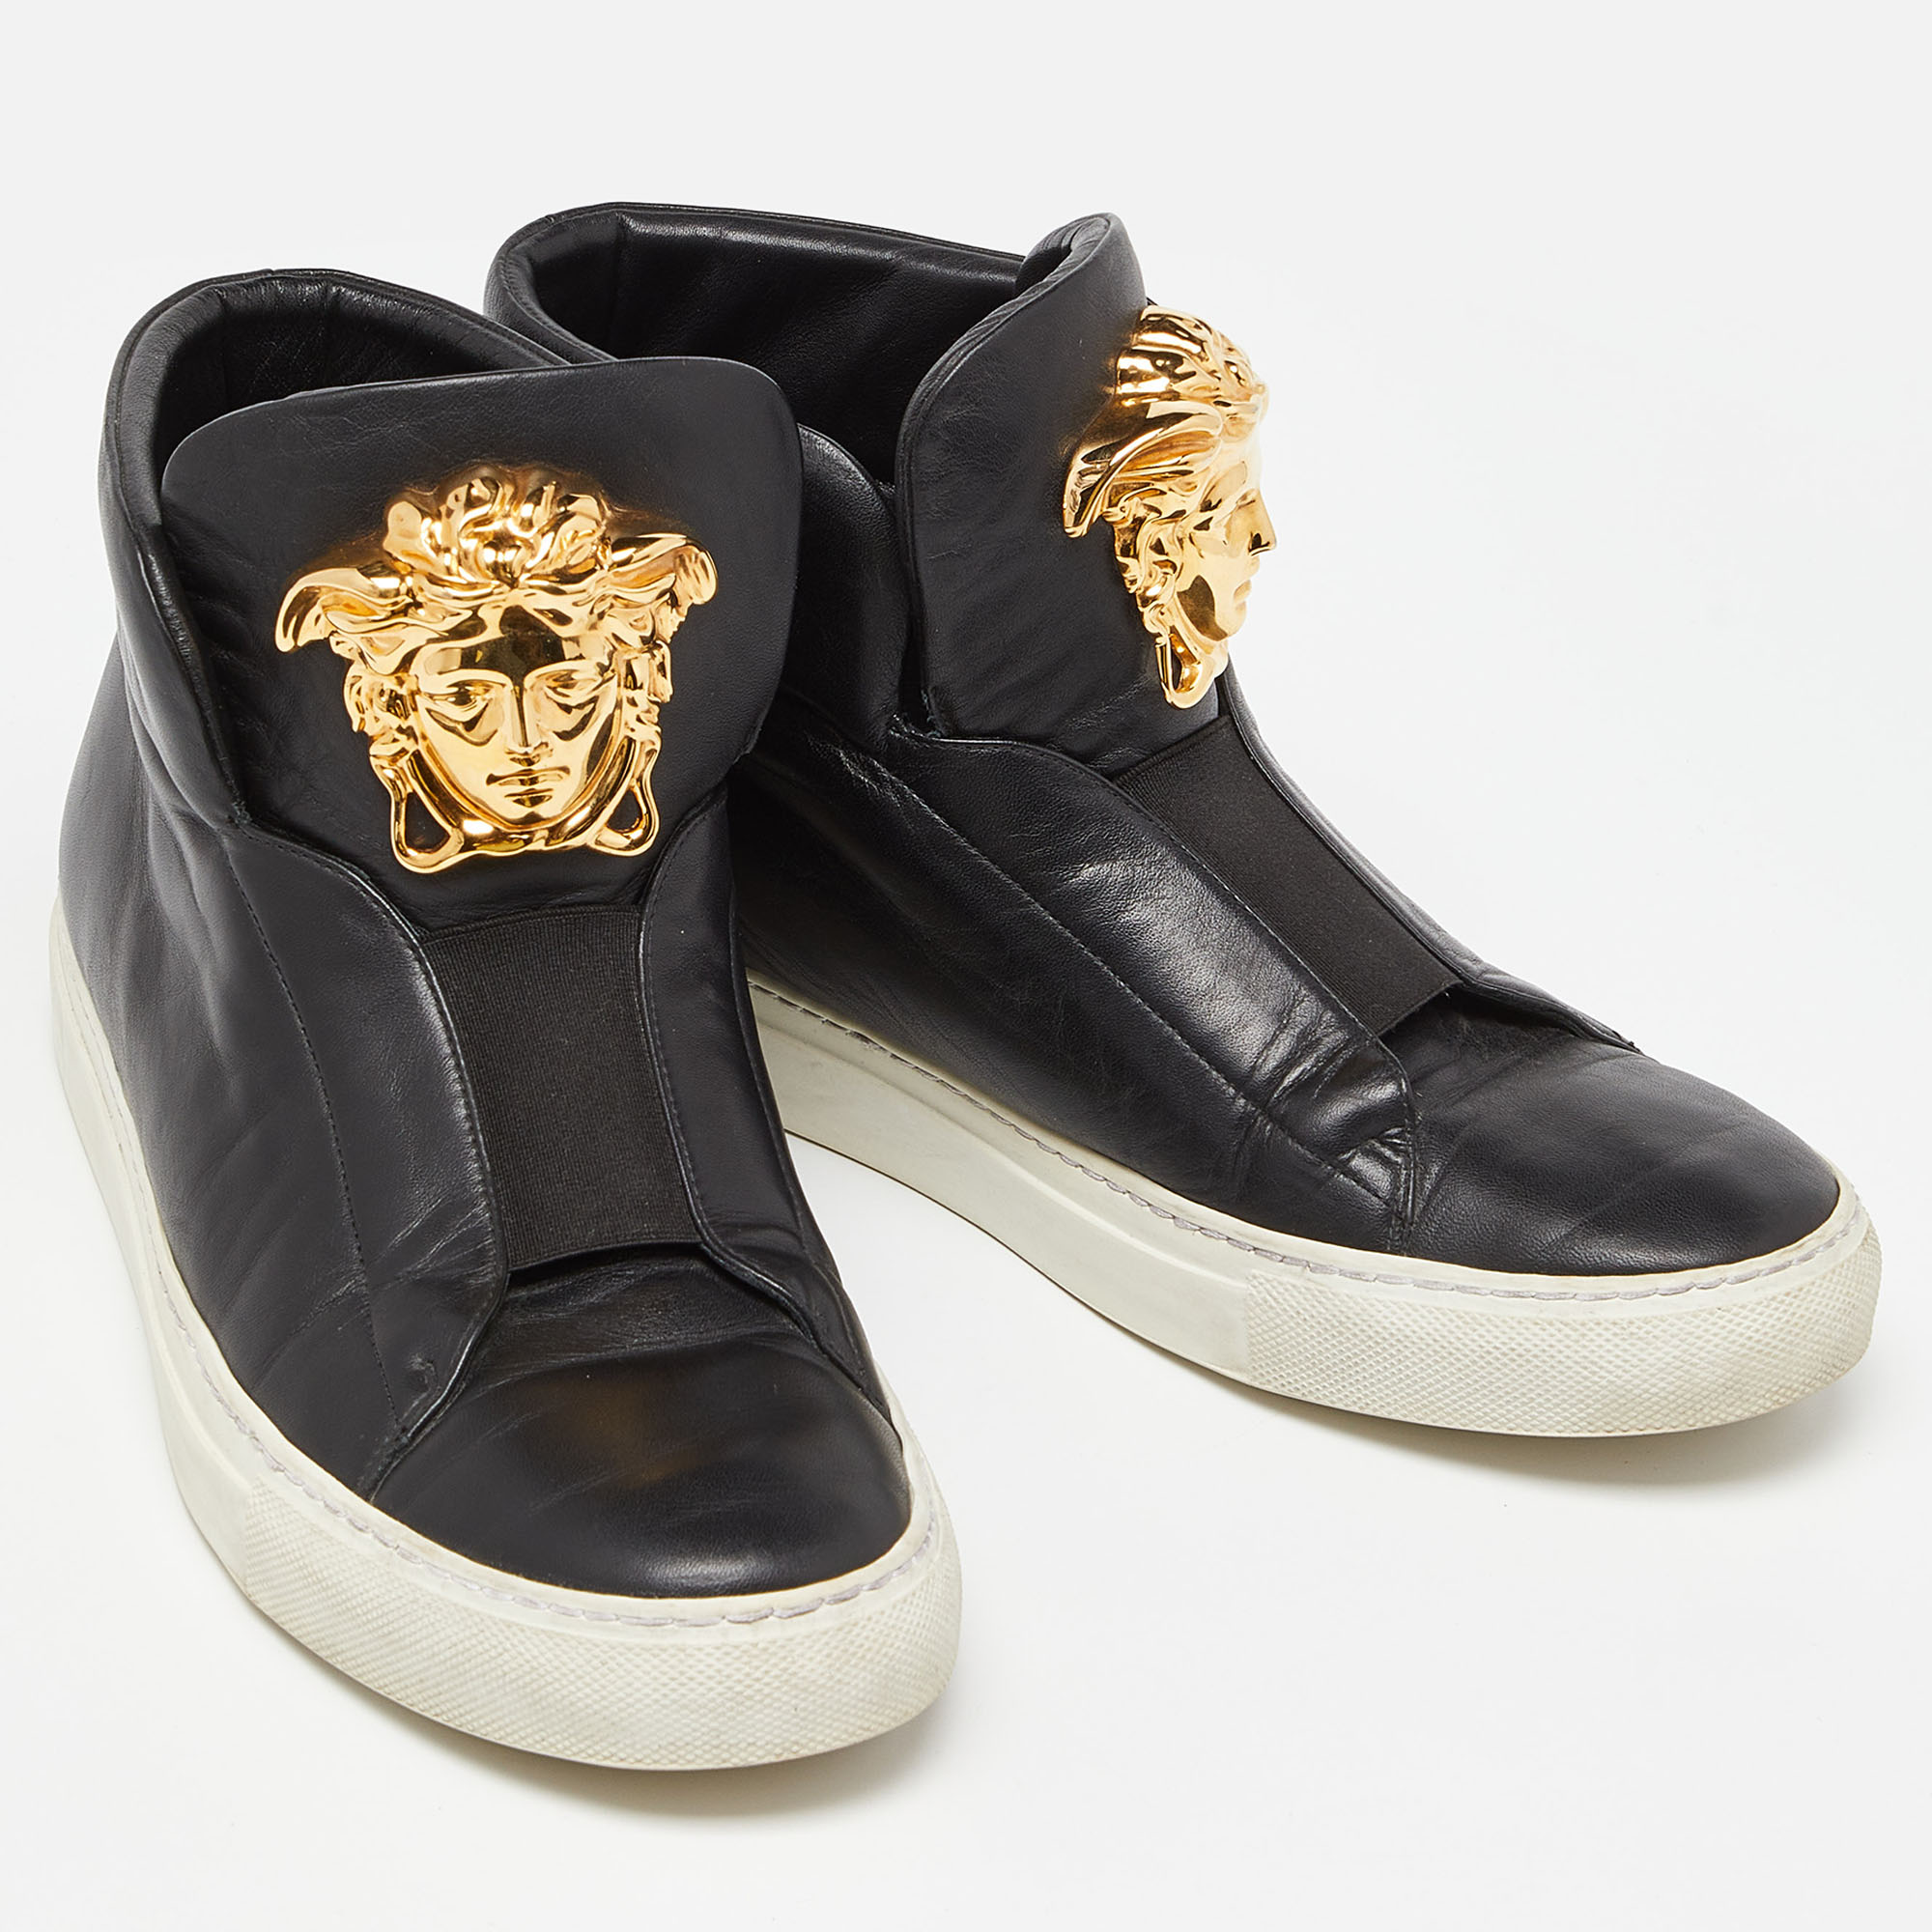 Versace Black Leather Medusa High Top Sneakers Size 40